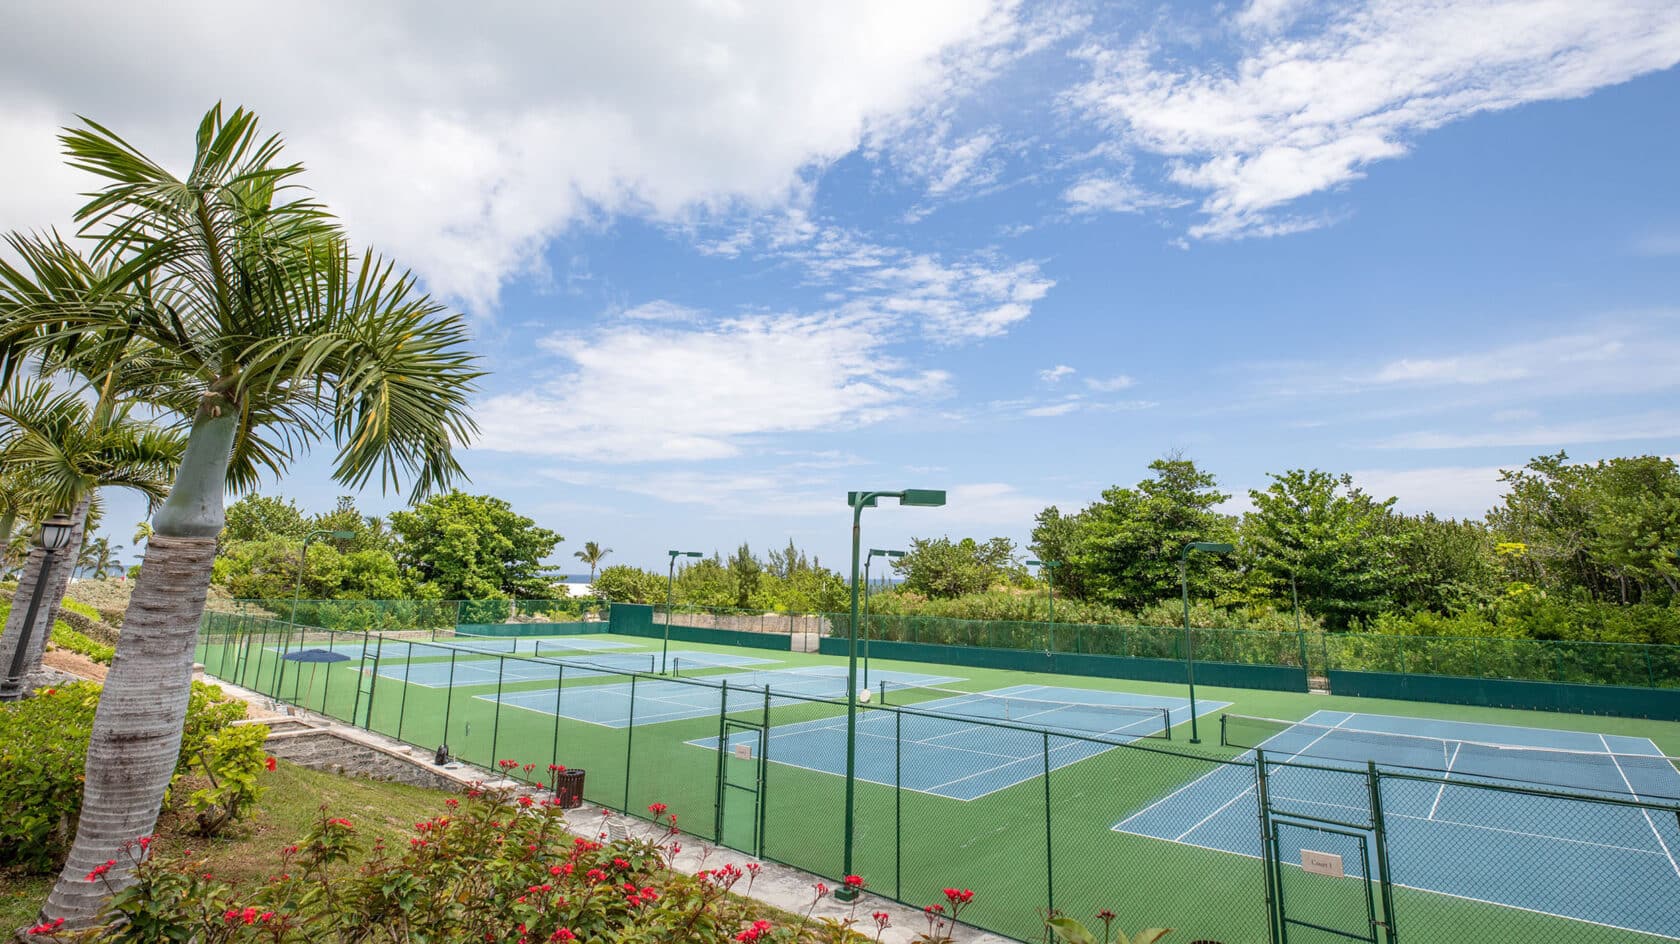 A tennis court with palm trees in the background, perfect for a Bermuda vacation.